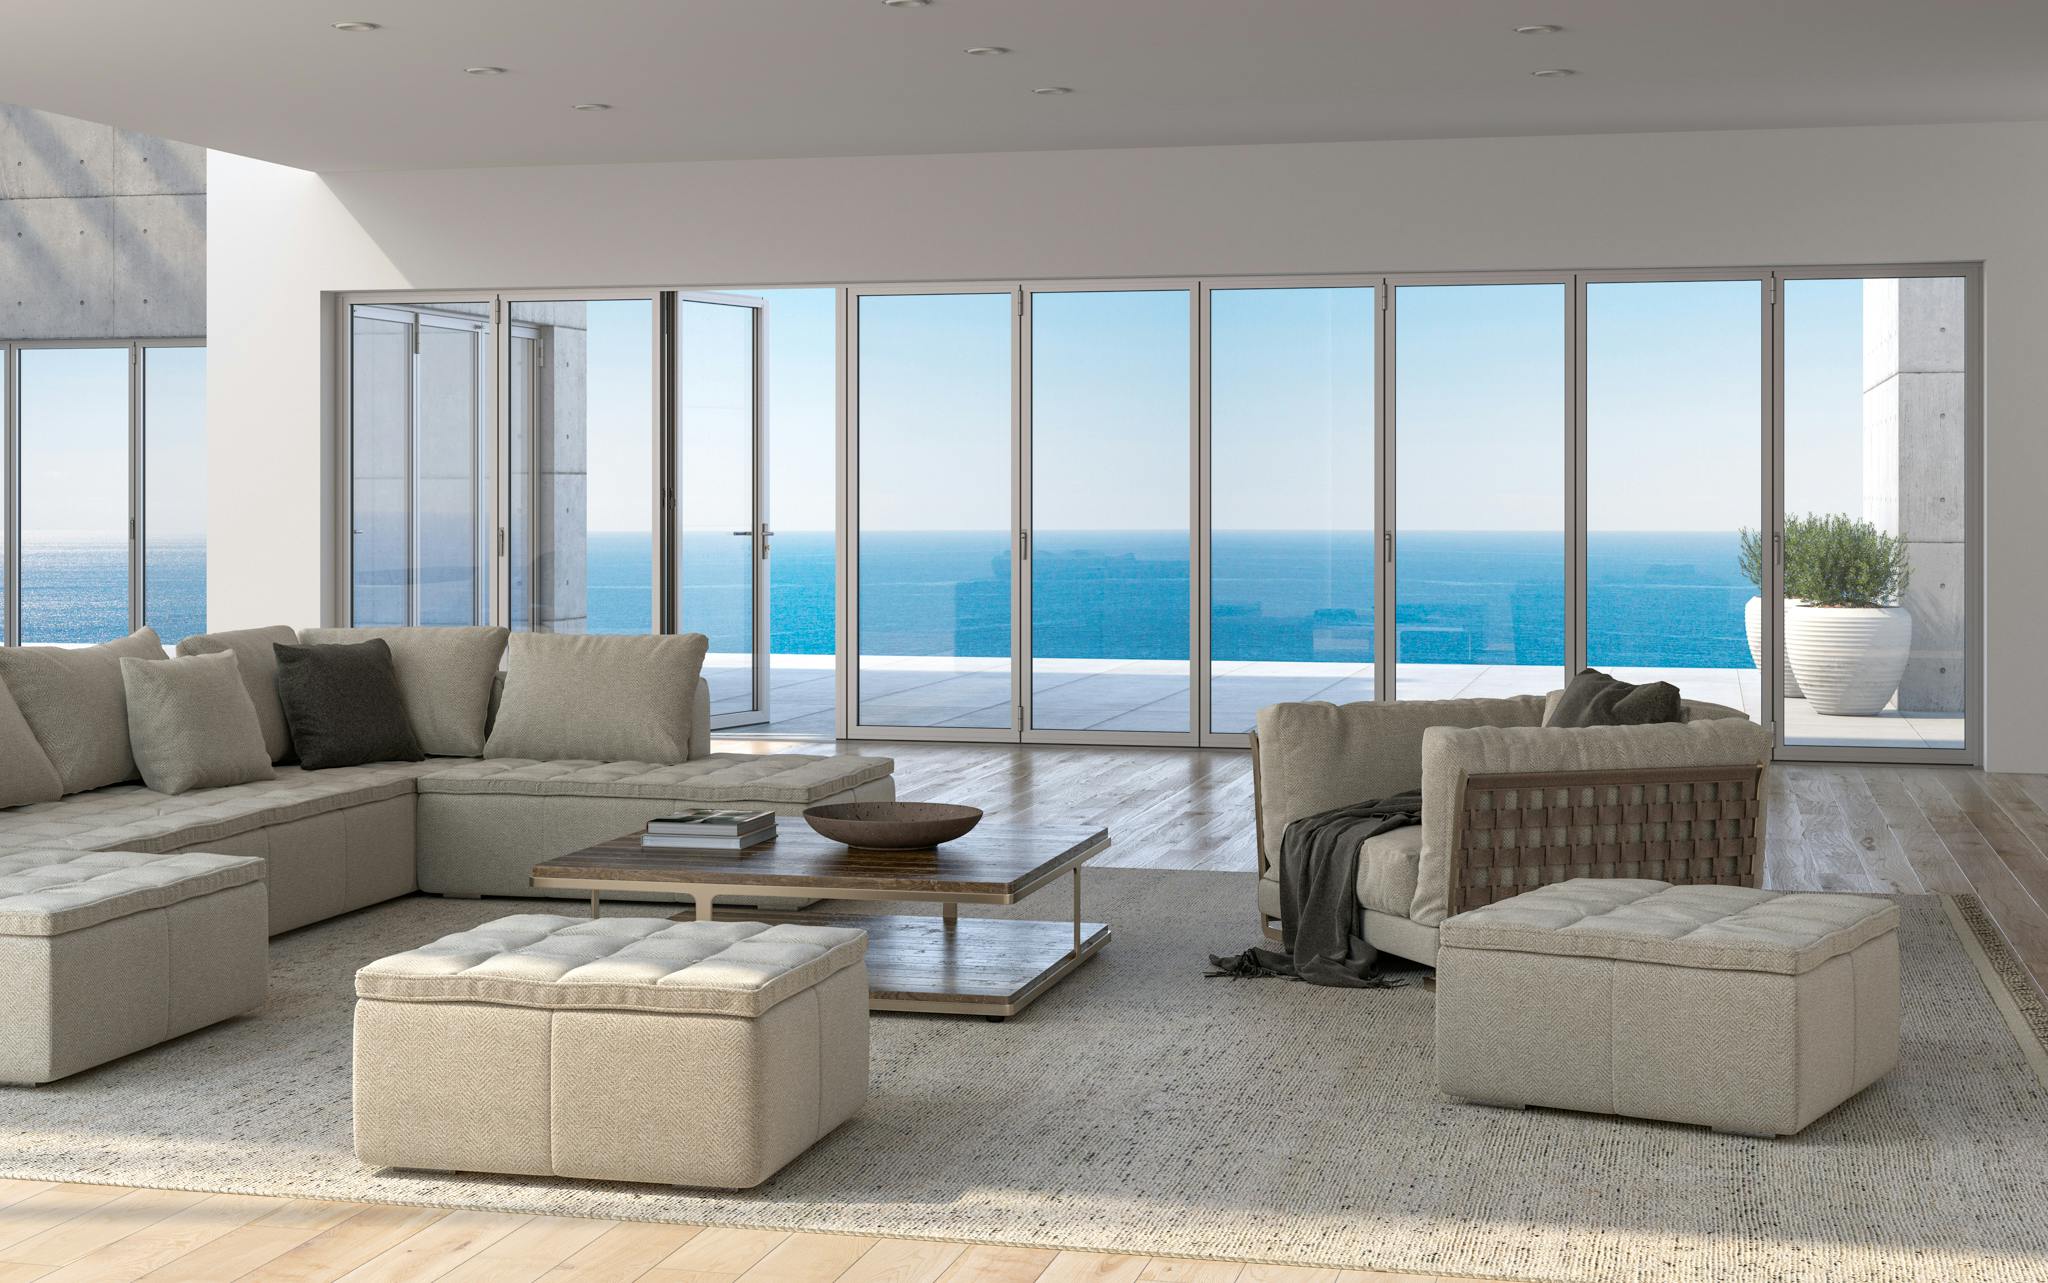 residential glass walls with ocean views